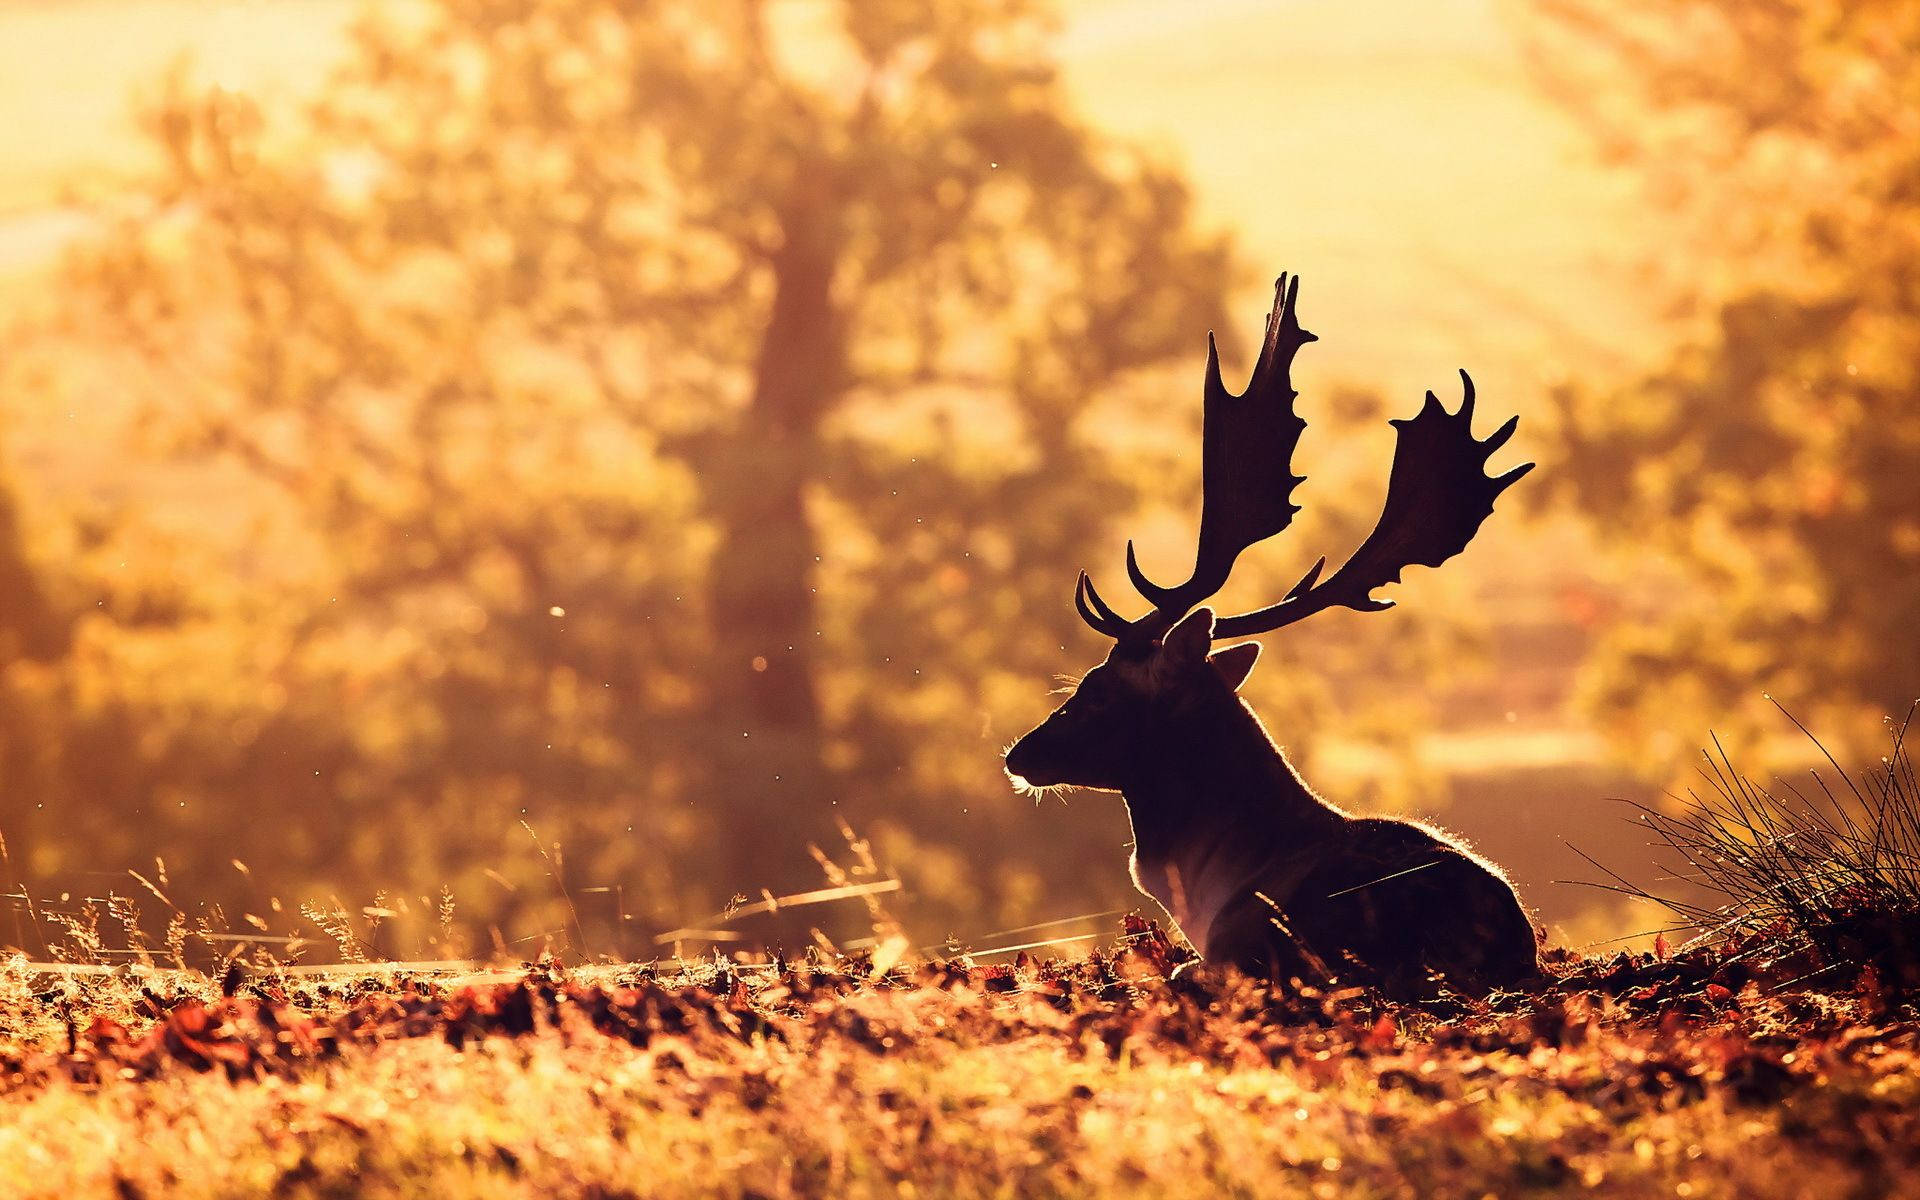 Deer With Antlers Silhouette Background